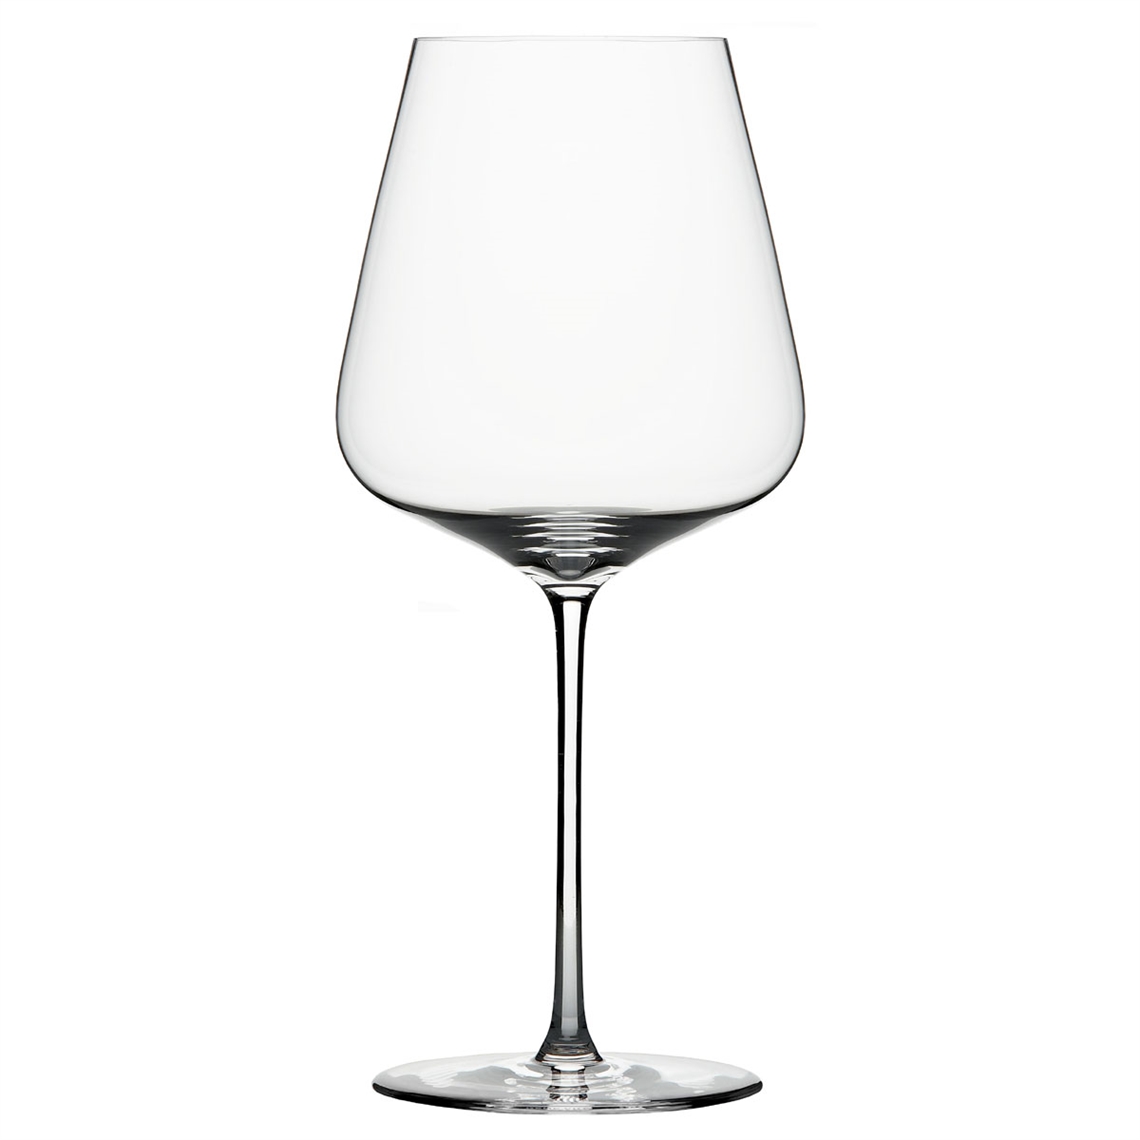 View more wine tasting glasses from our Premium Mouth Blown Glassware range